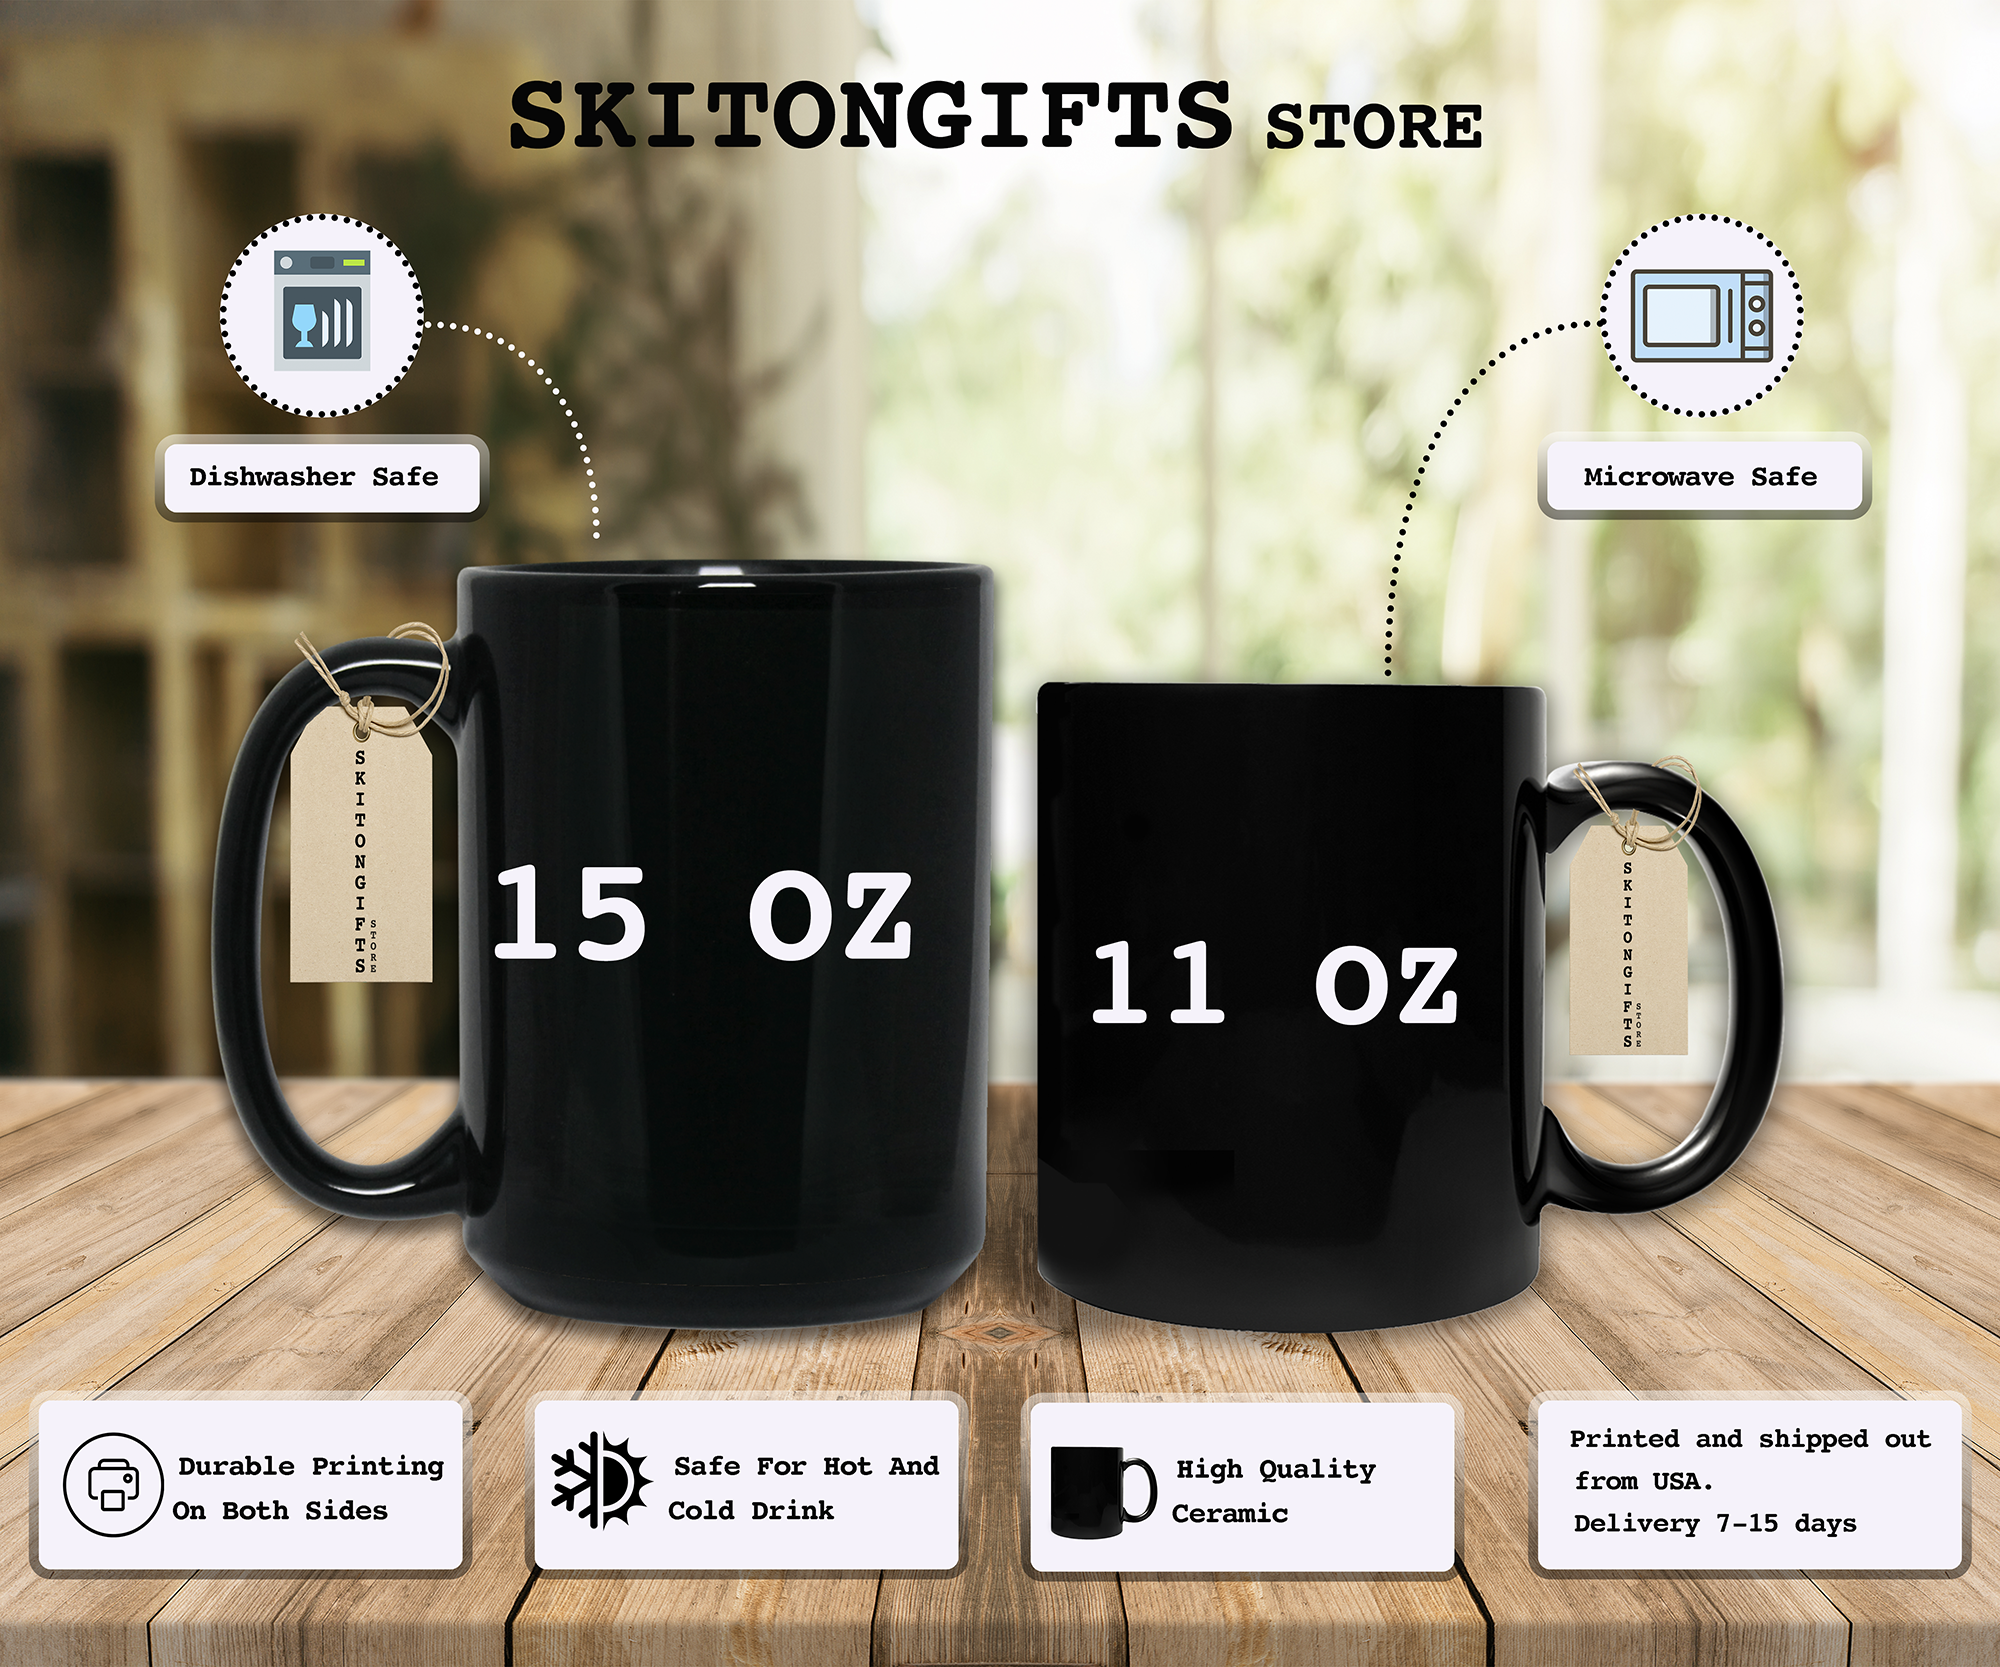 Skitongifts Coffee Mug Funny Ceramic Novelty If I've Ever Offended You I'm Sorry. That You're A Little Bitch JHXZZ0X